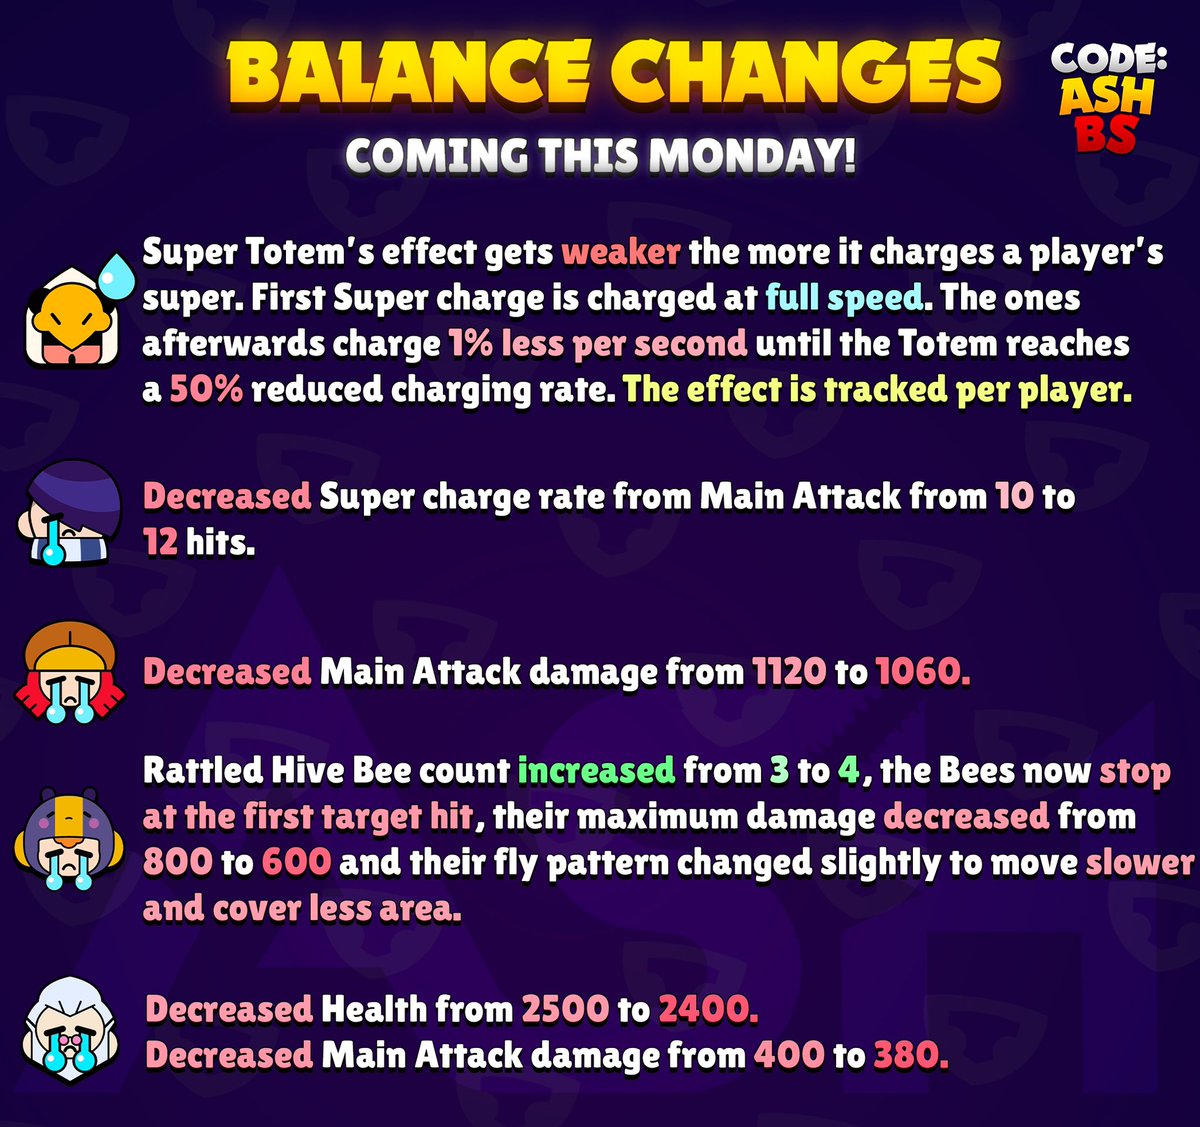 Code Ashbs On Twitter New Balance Changes Coming This Monday Many Of The Top Meta Brawlers Are Getting Nerfed Edgar Jessie Byron And Bea Brawlstars Https T Co 6ko3359u1d - may balance changes brawl stars